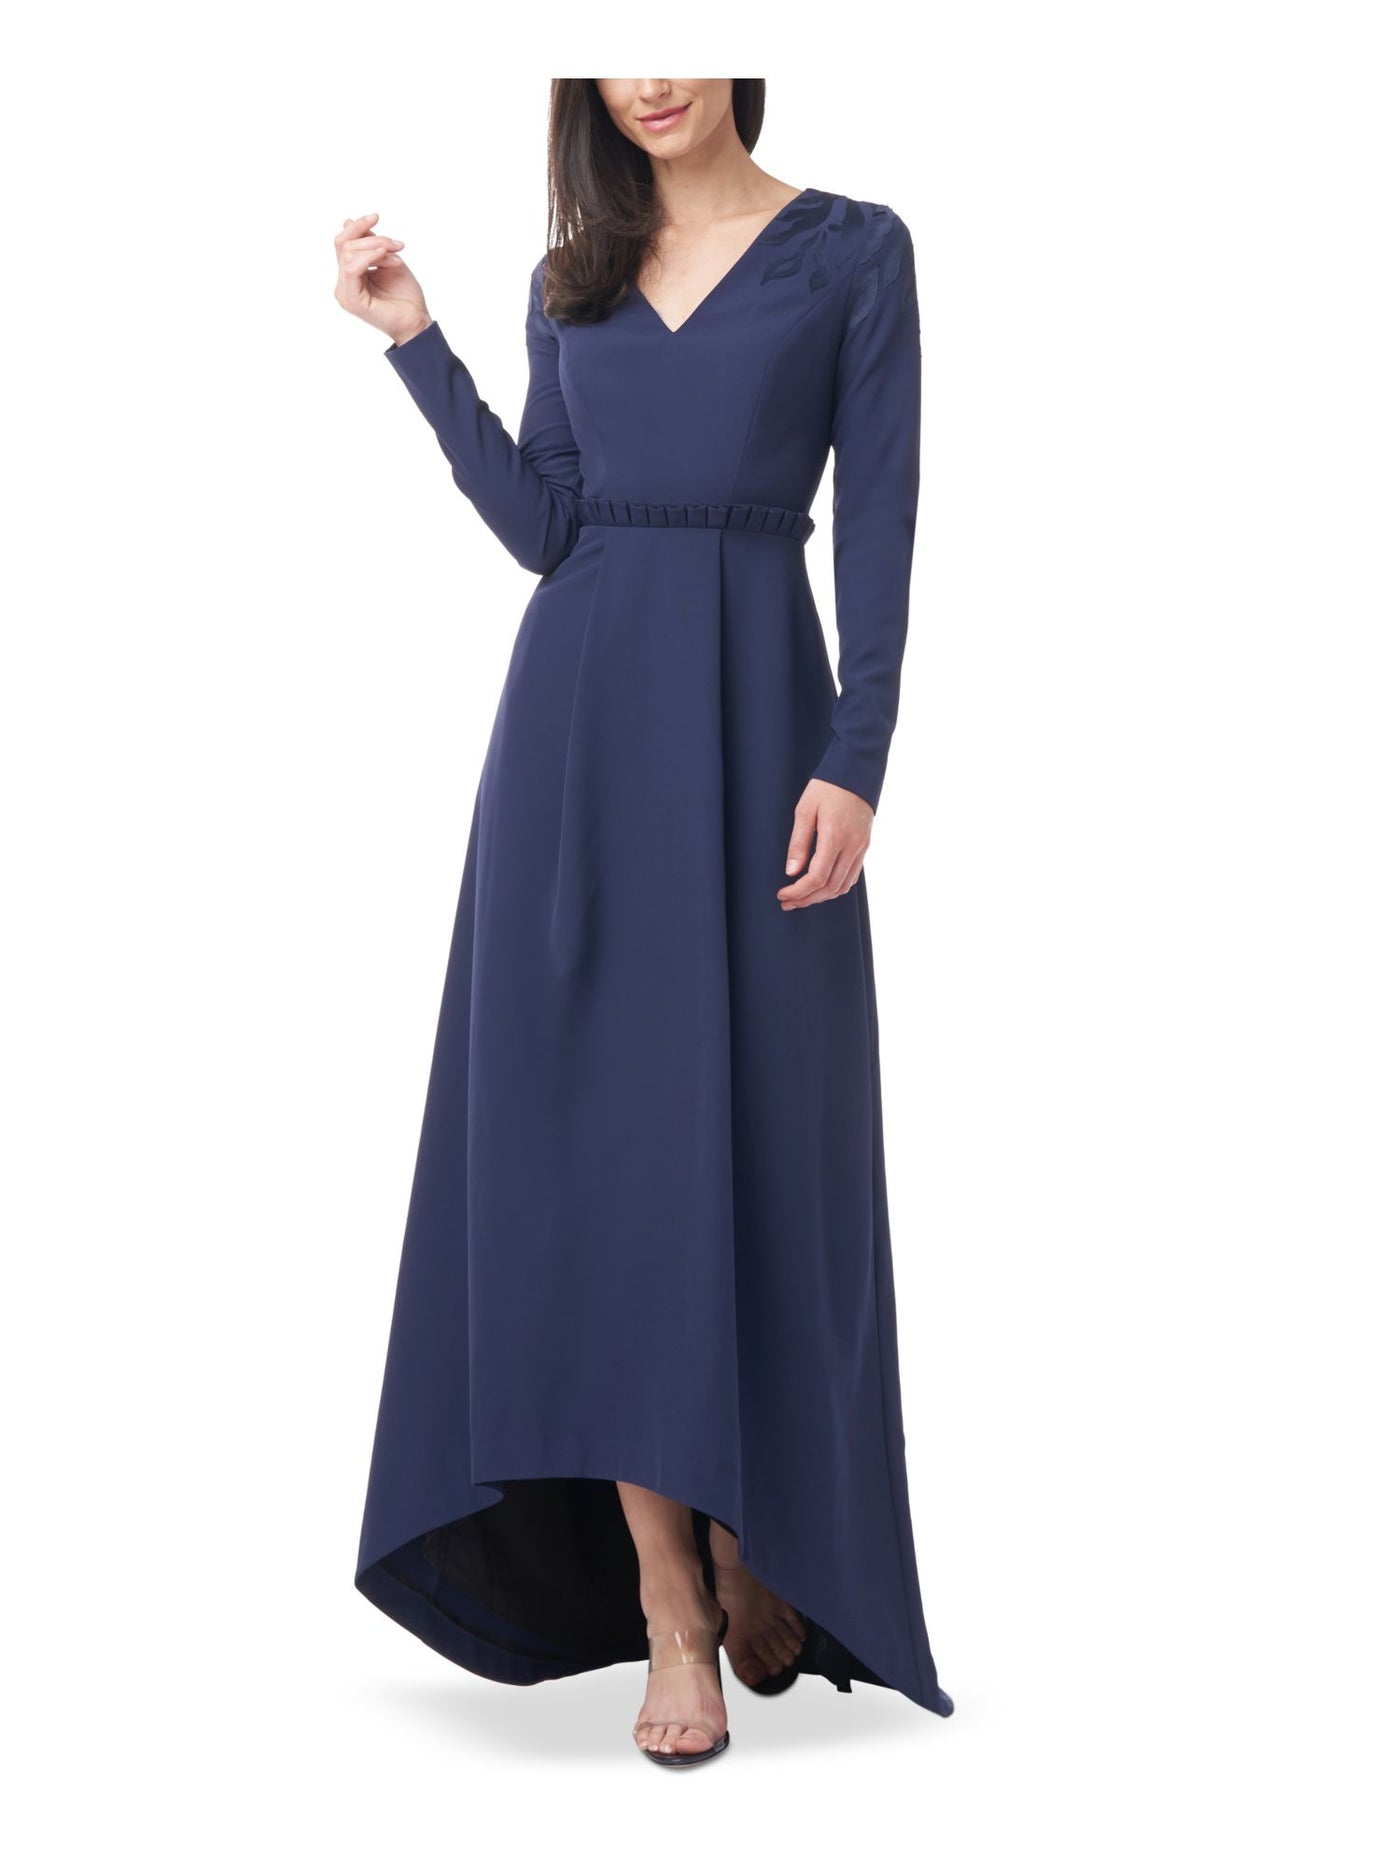 JS COLLECTION Womens Navy Stretch Zippered Pleated Ruffled Waist Hi-lo Hem Long Sleeve V Neck Full-Length Party Fit + Flare Dress 6